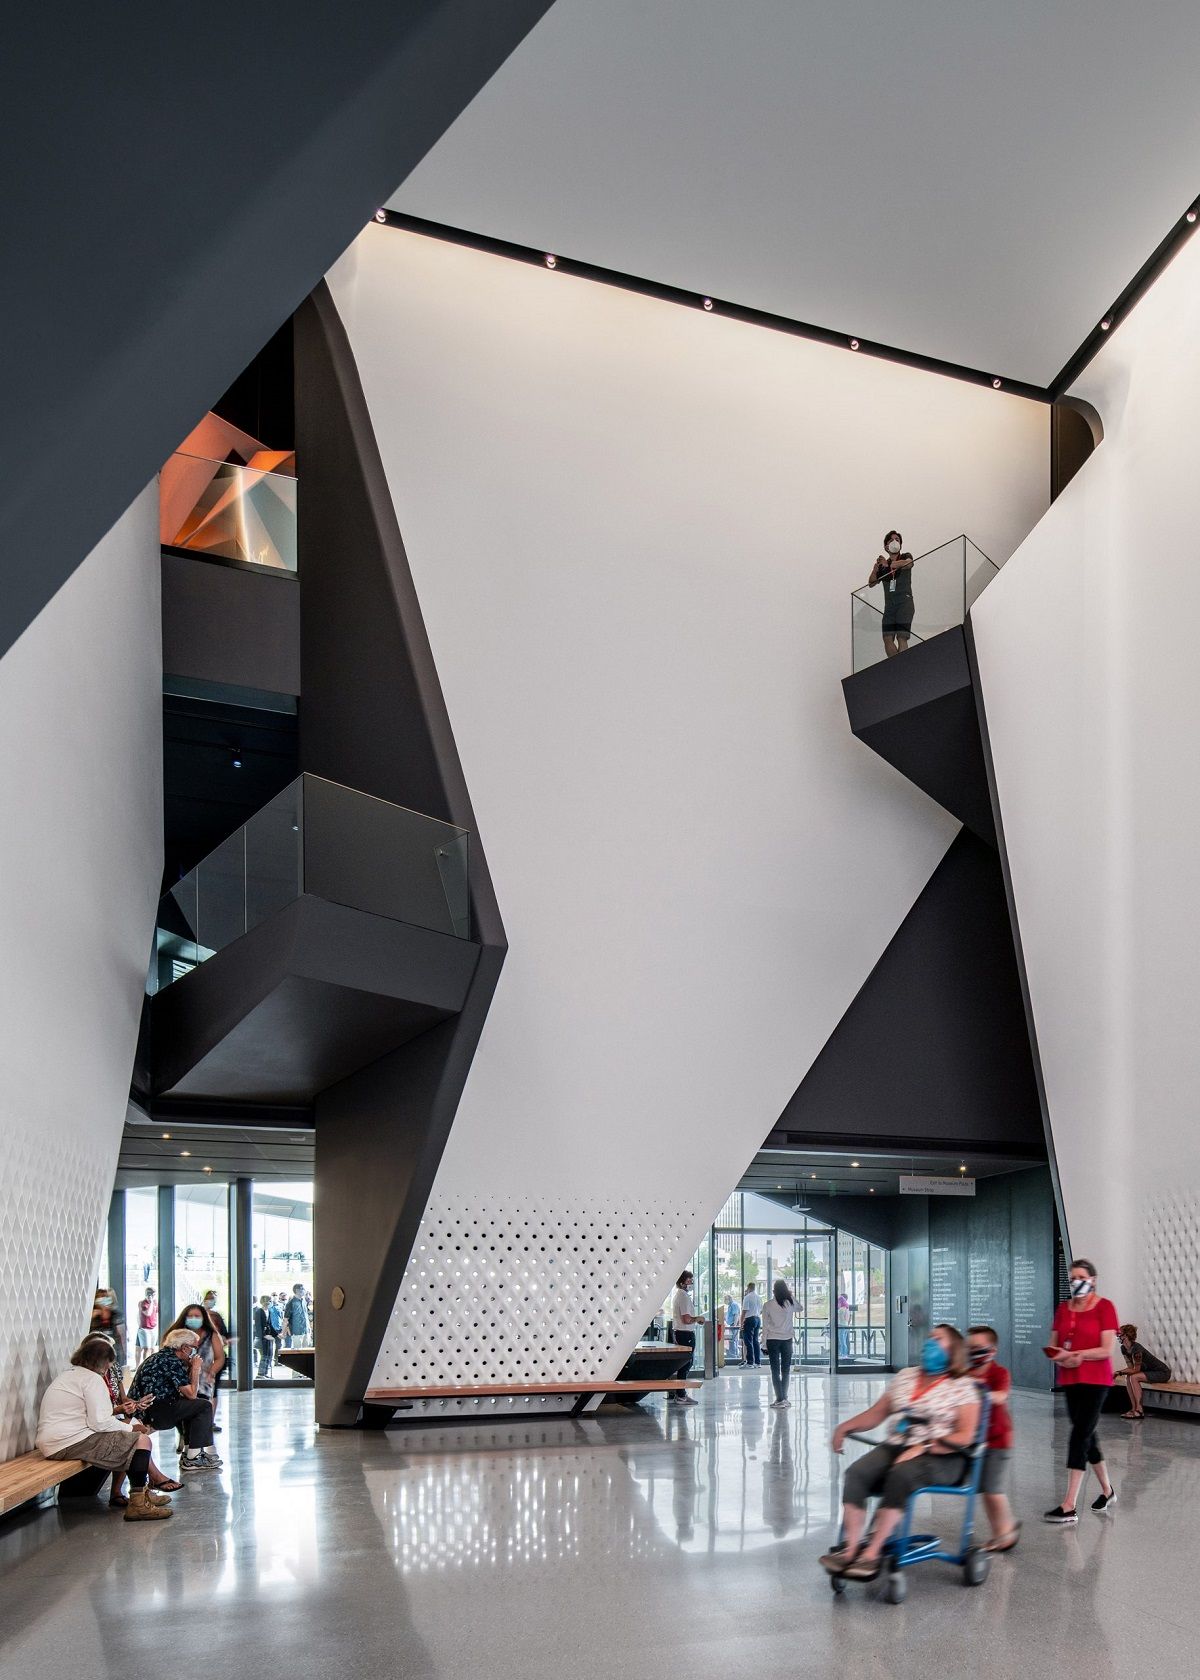 us olympic paralympic museum diller scofidio renfro colorado springs dezeen 2364 col 6 scaled 1